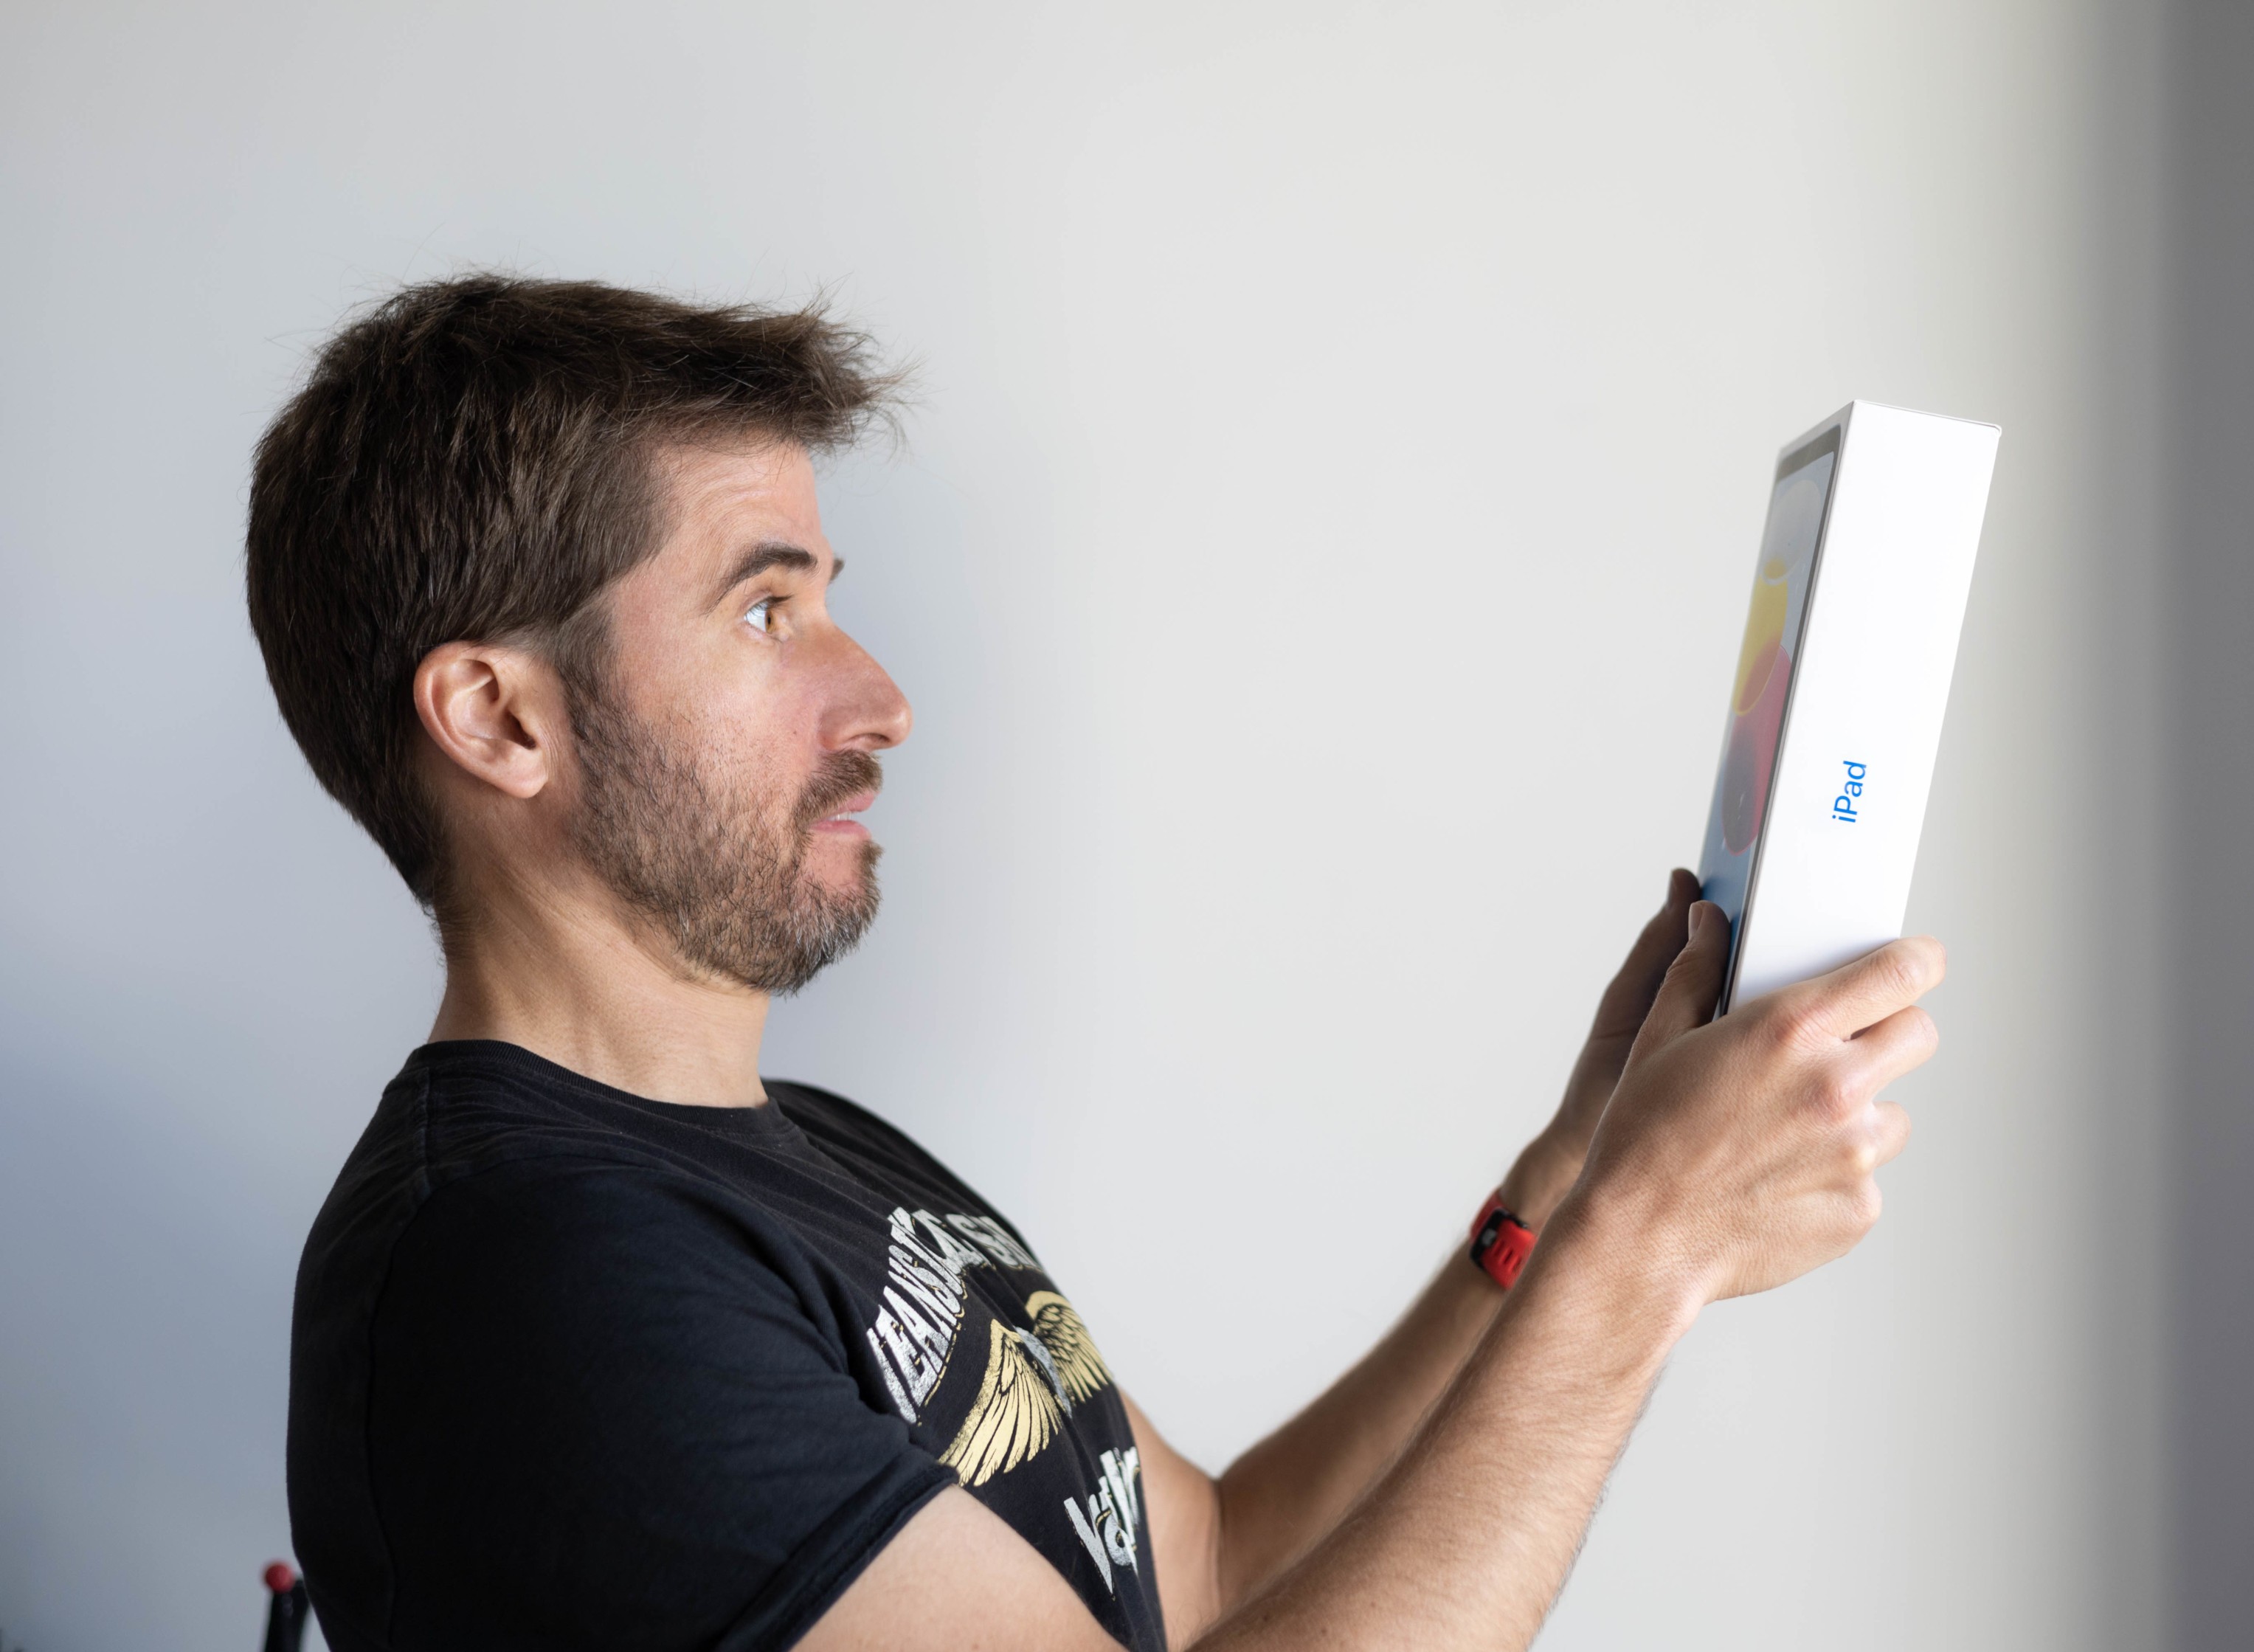 An image of Marc holding an iPad with mixed feelings